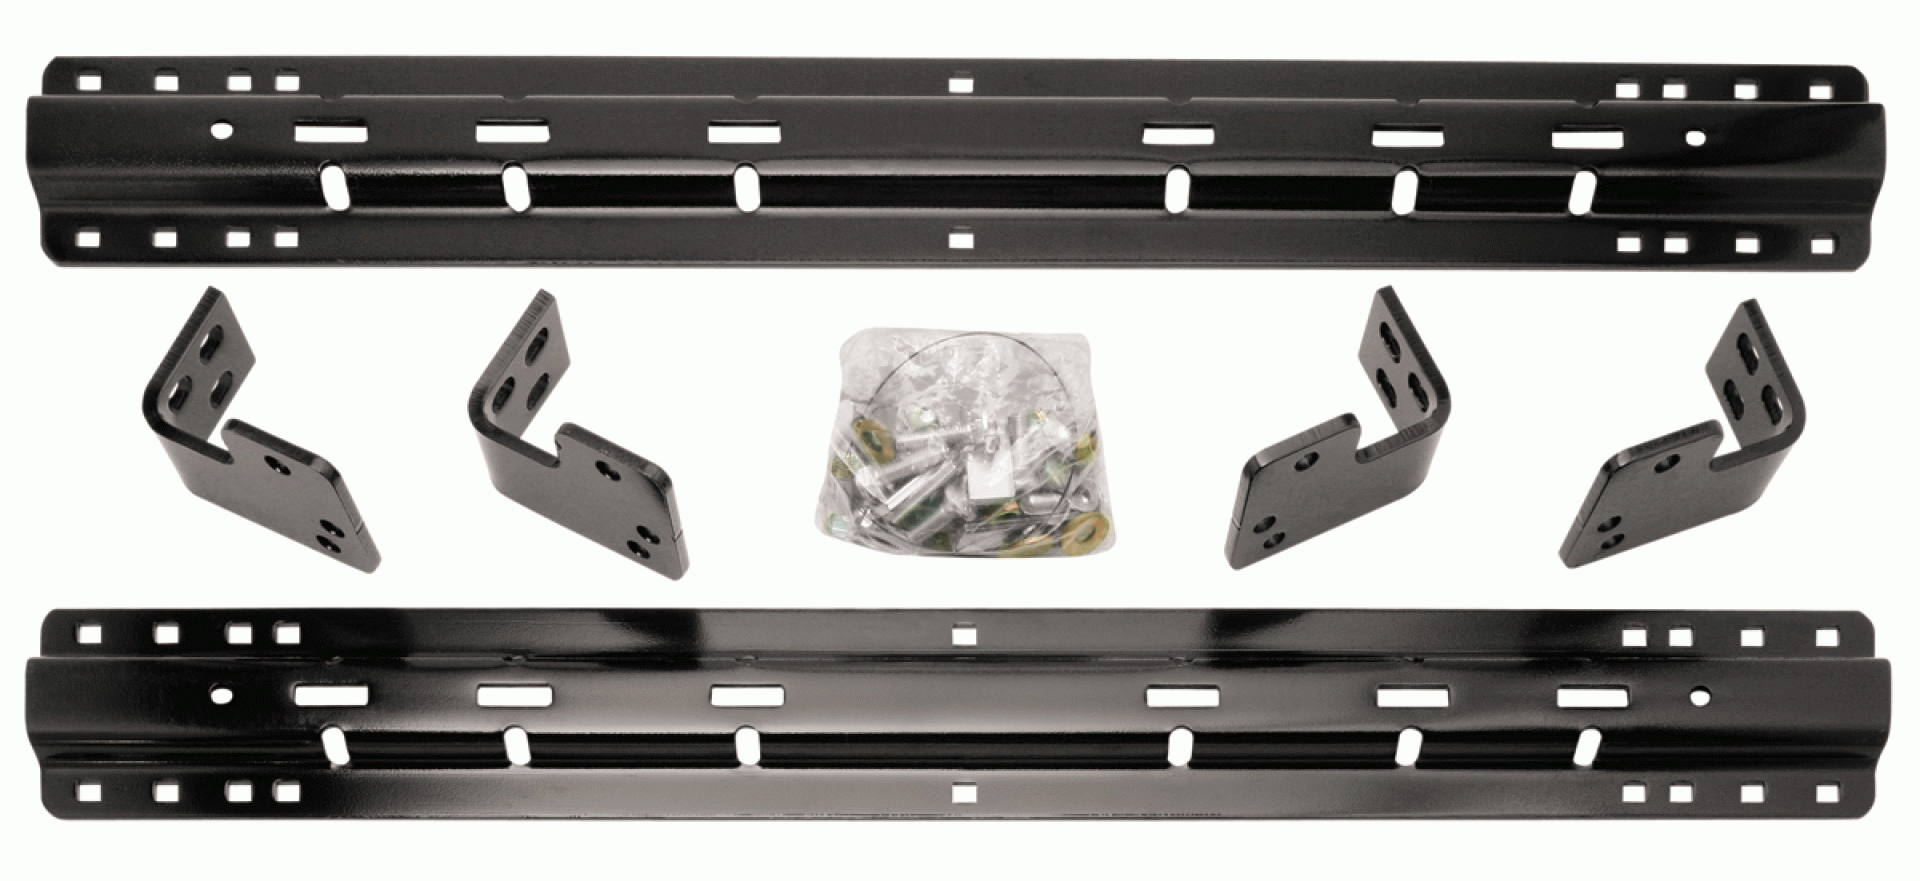 REESE | 30080 | RAIL KIT FOR FIFTH WHEEL 2004-10 Ford 150 (New Body Style)